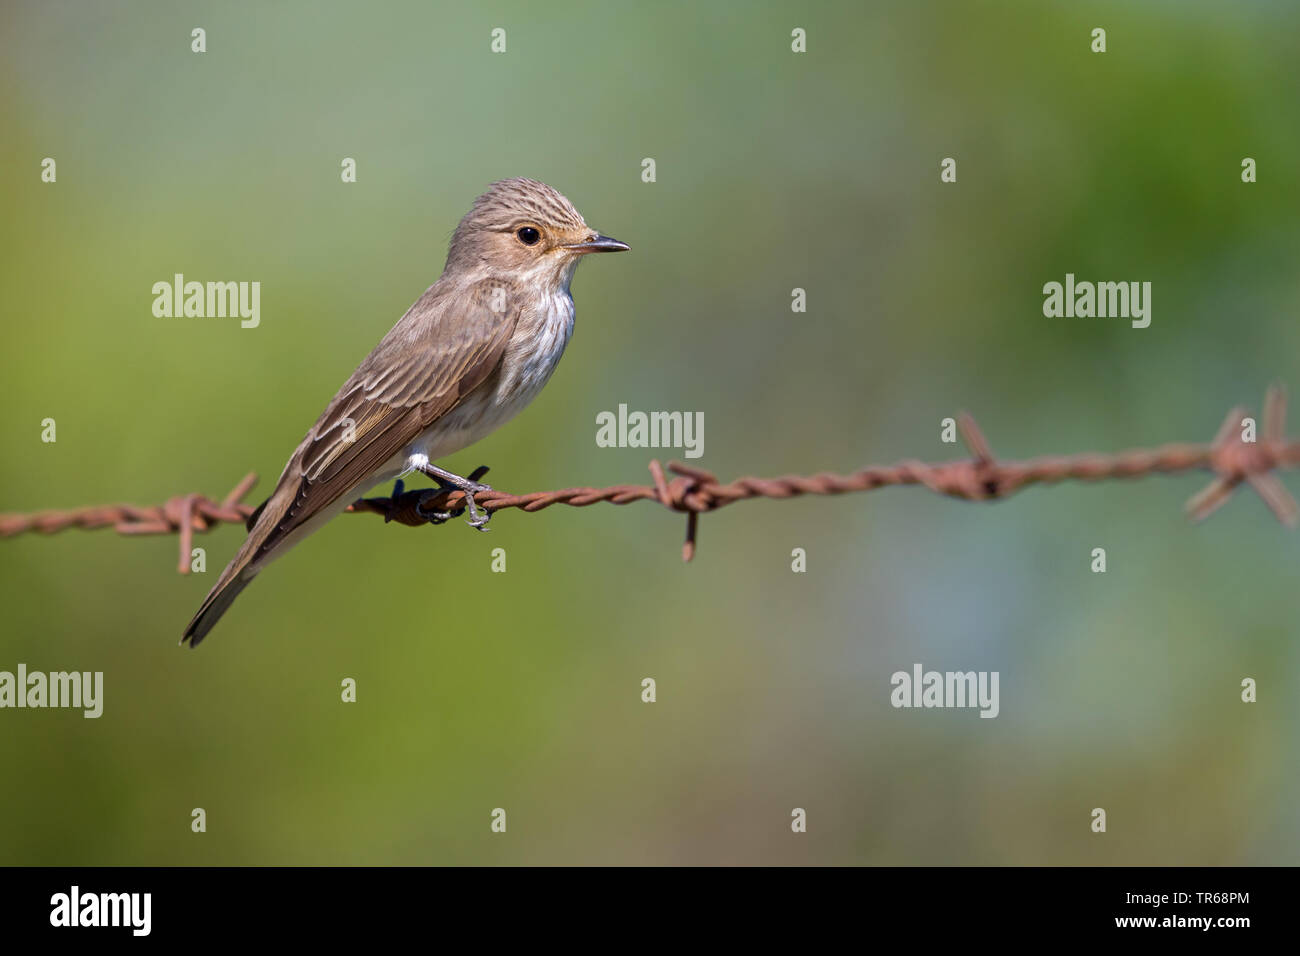 spotted flycatcher (Muscicapa striata), sitting on a rusty barb wire fence, Greece, Lesbos Stock Photo